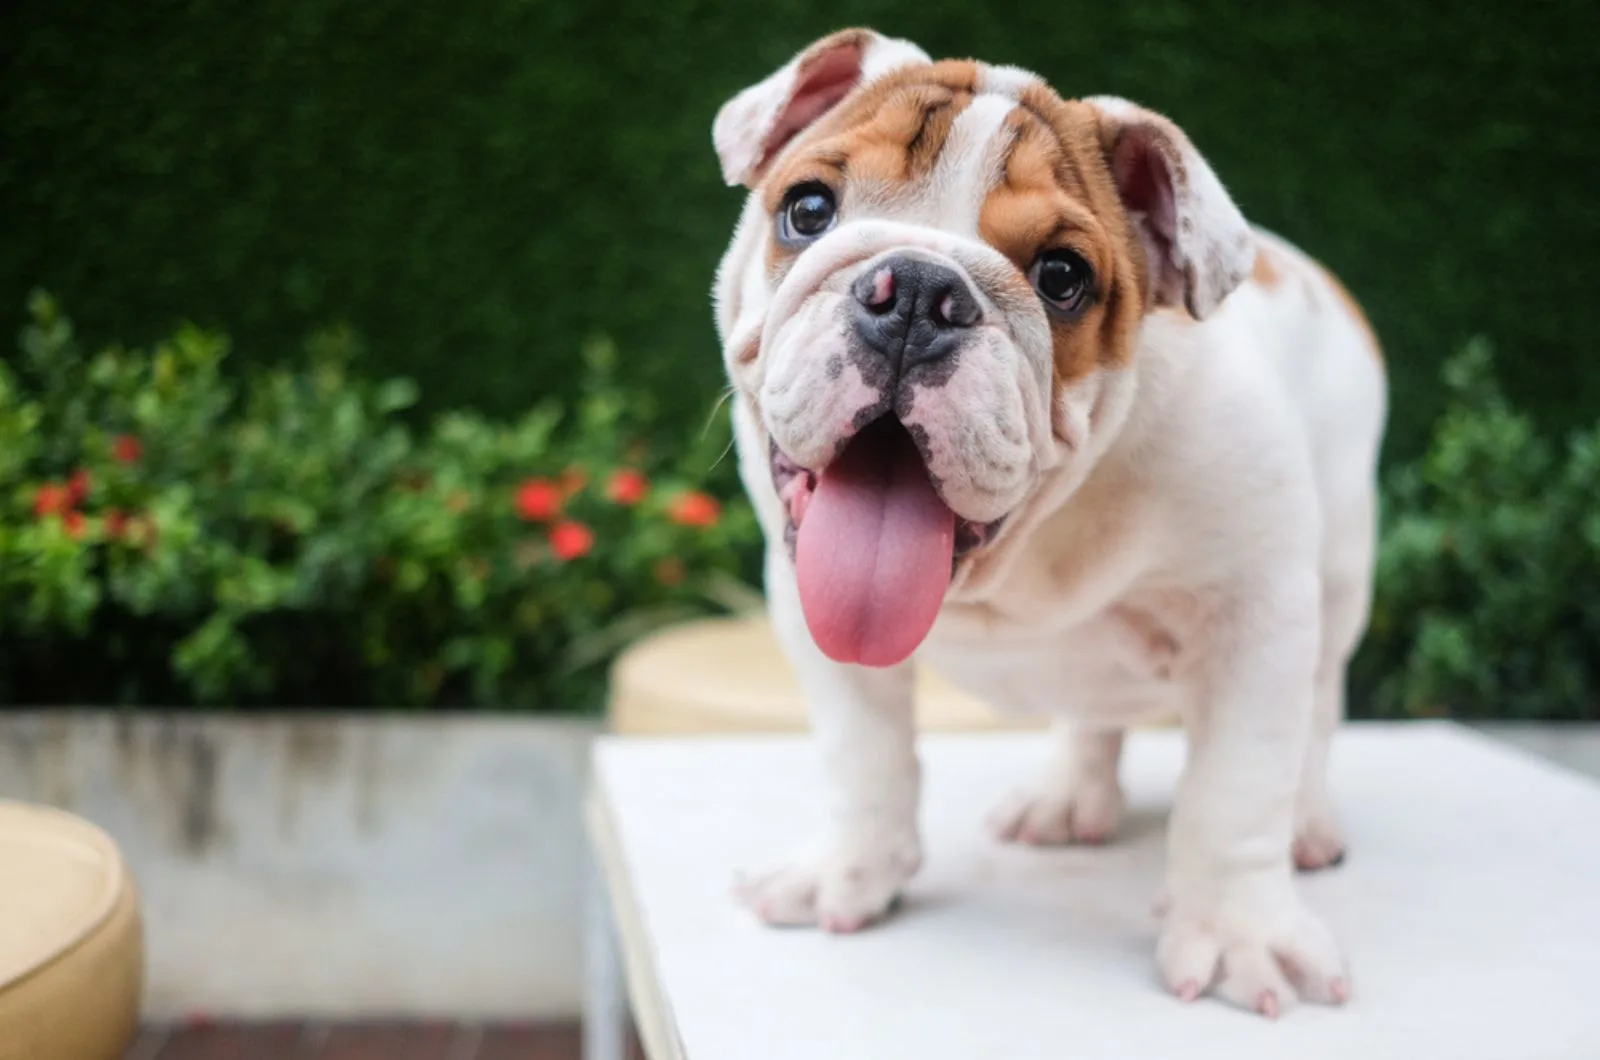 cute english bulldog puppy playing on the table outdoors